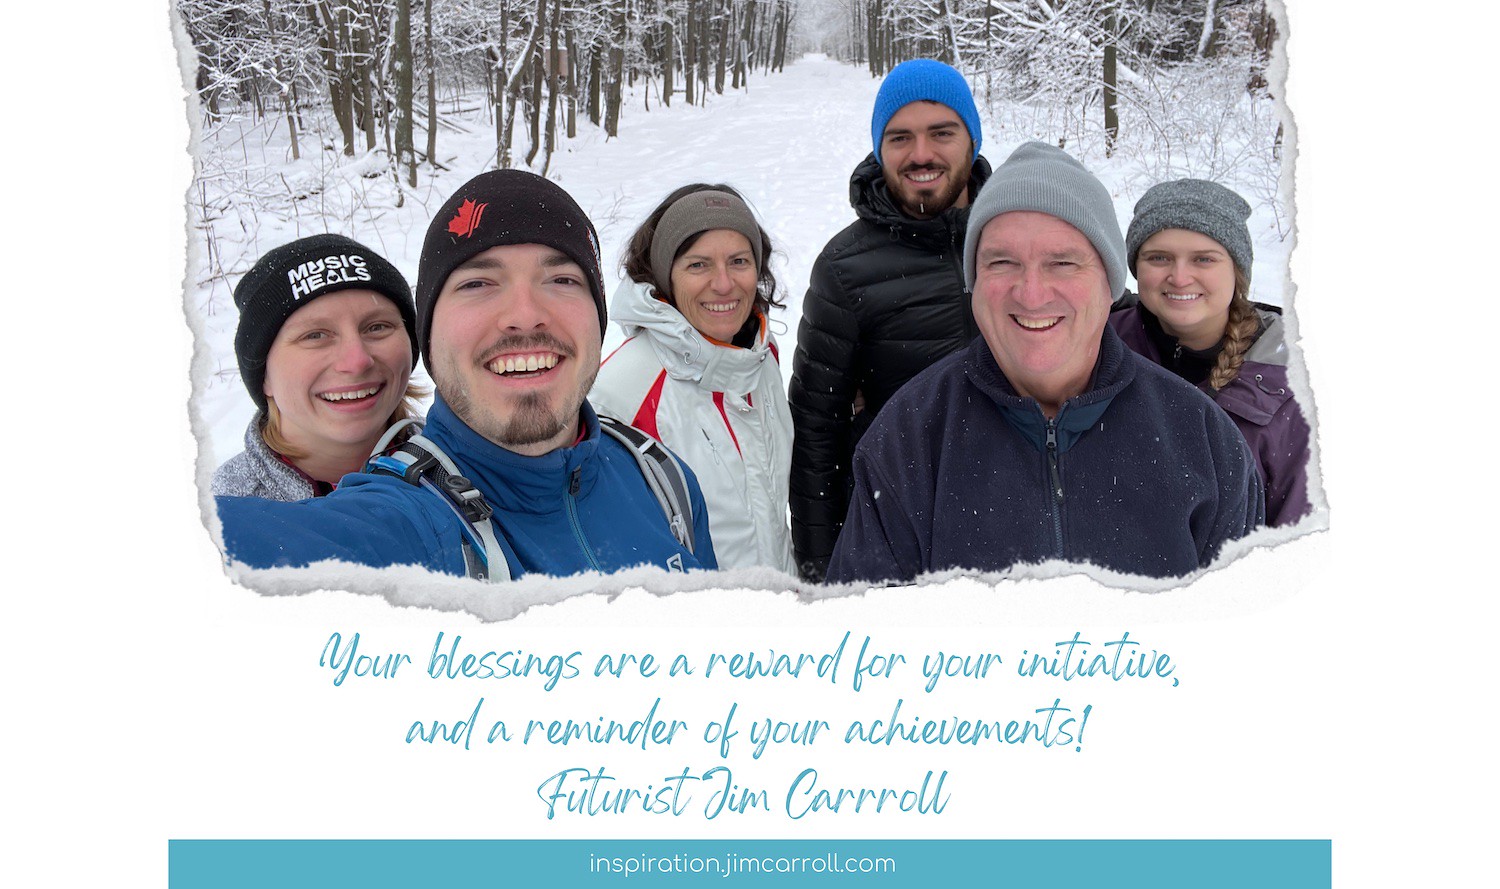 "Your blessings are a reward for your initiative, and a reminder of your achievements!" - Futurist Jim Carroll